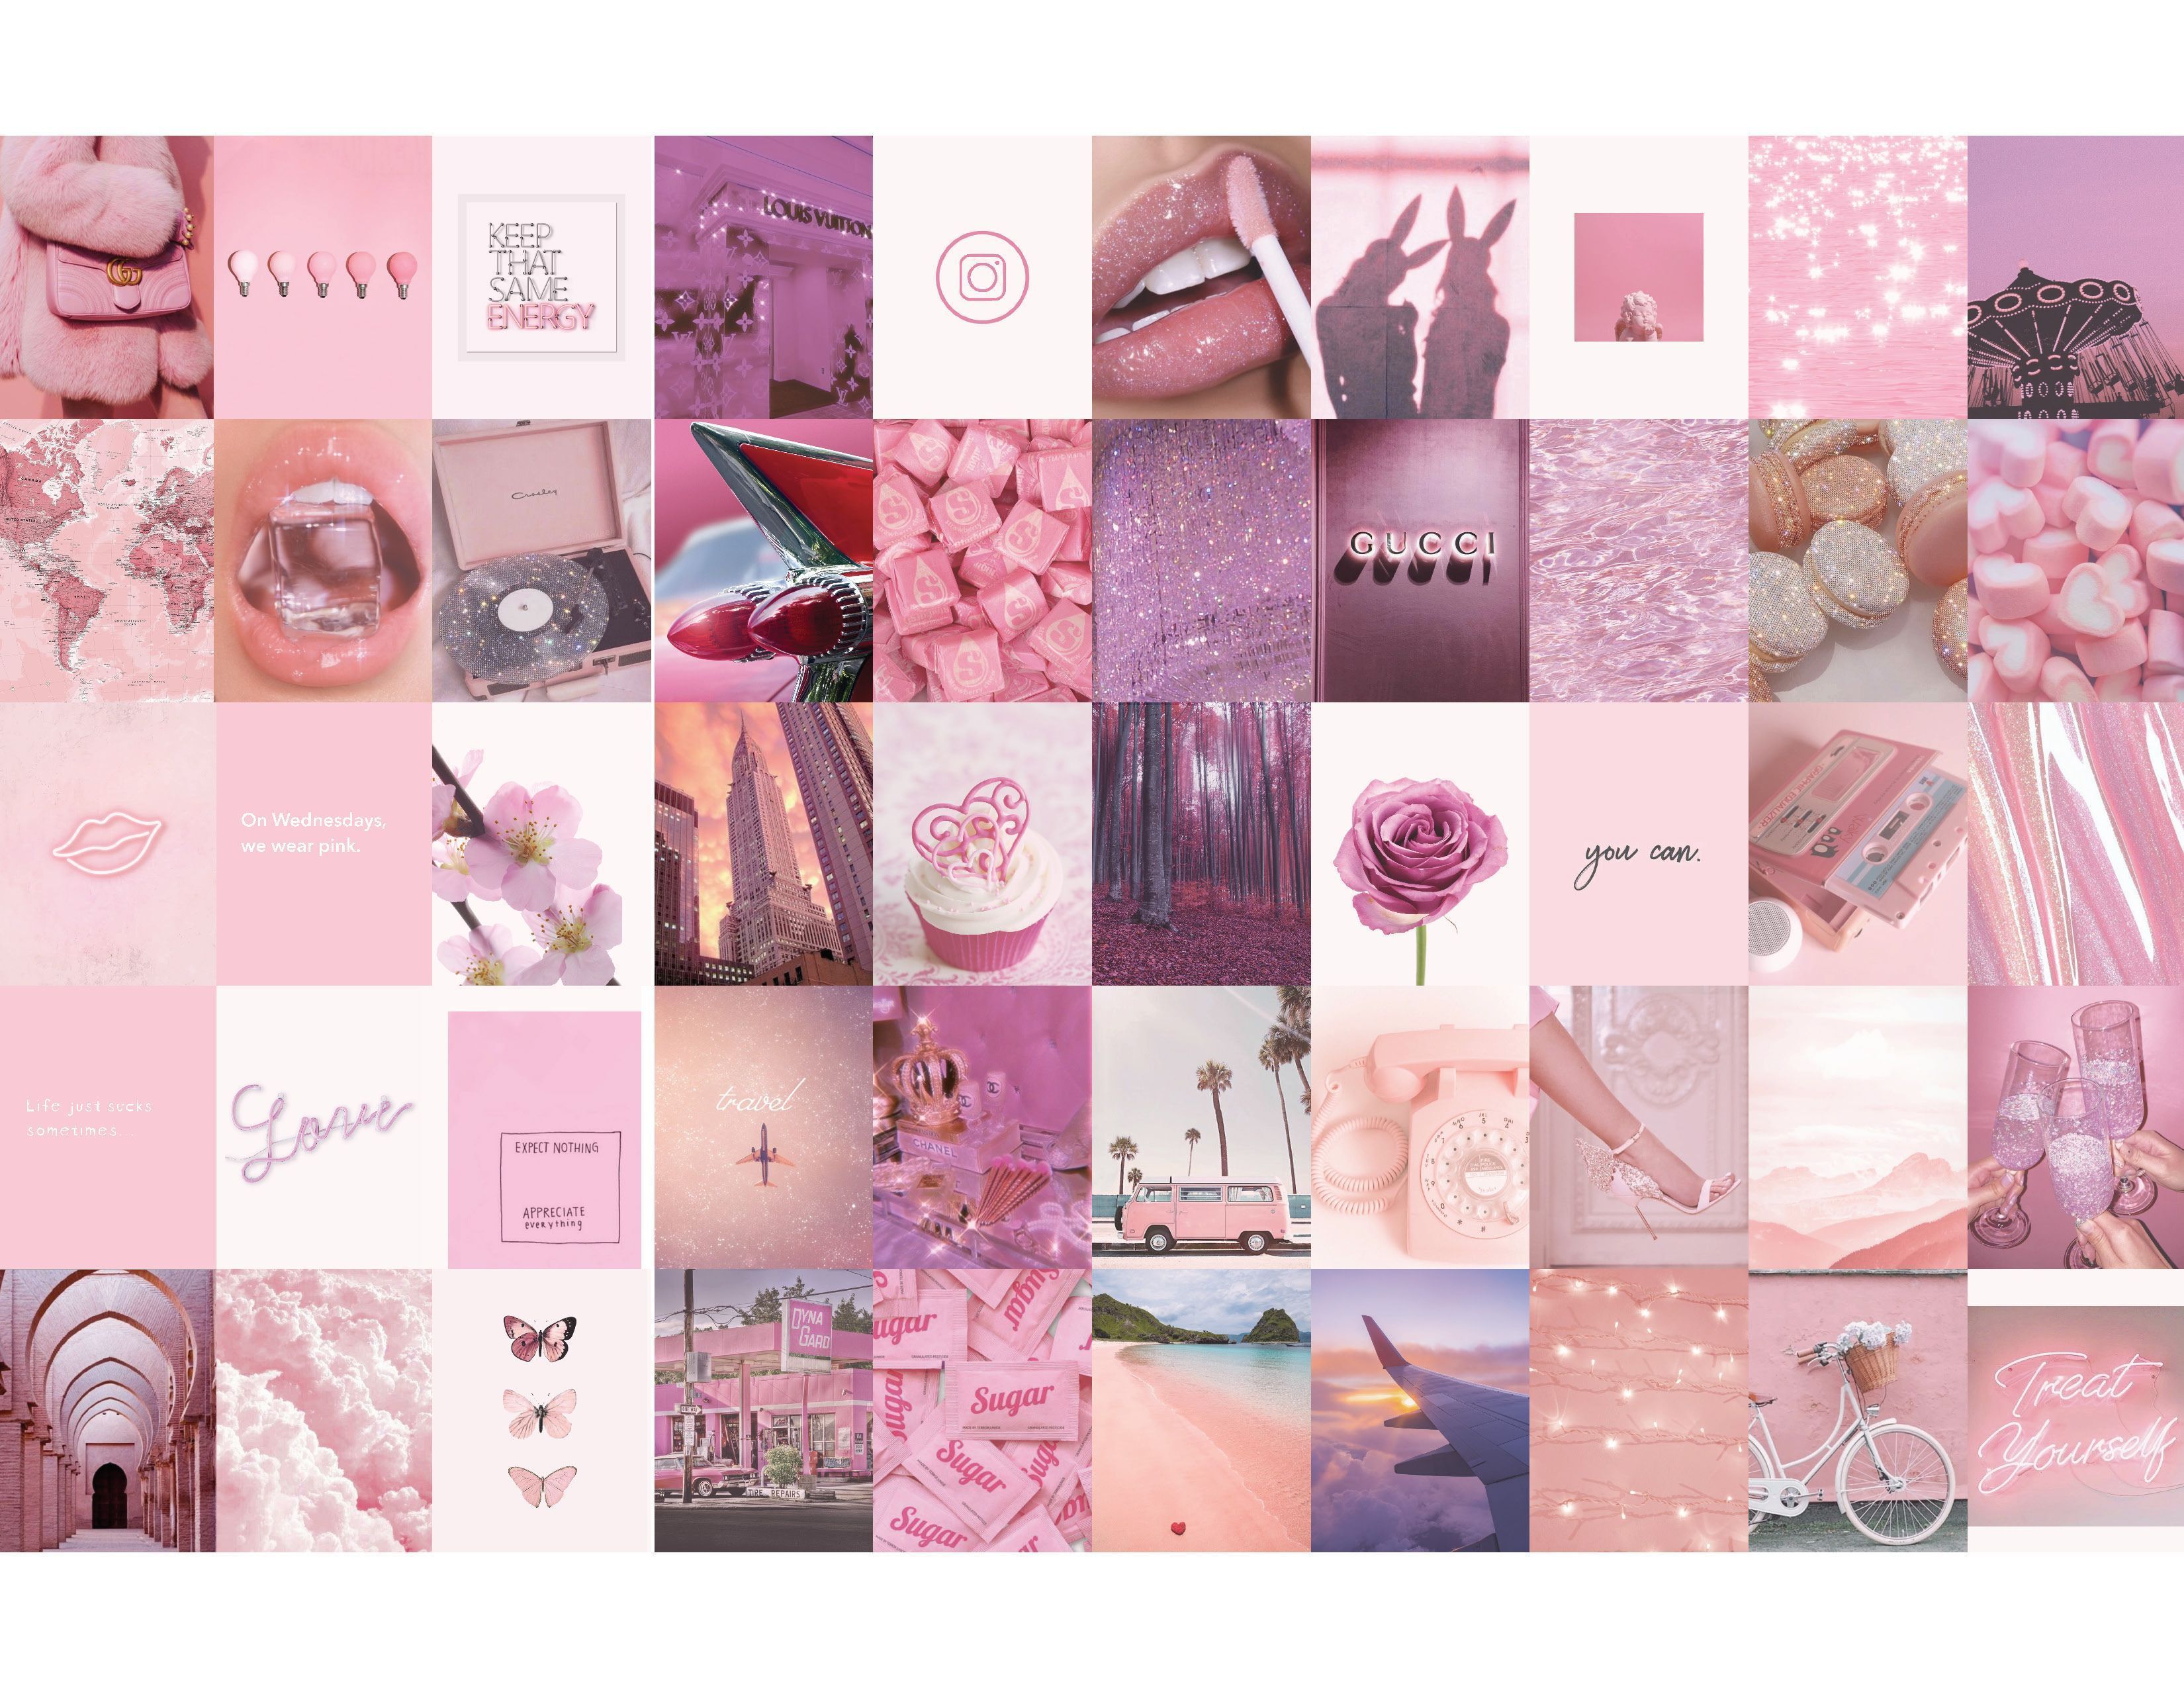 A collage of pink and white images - Pink collage